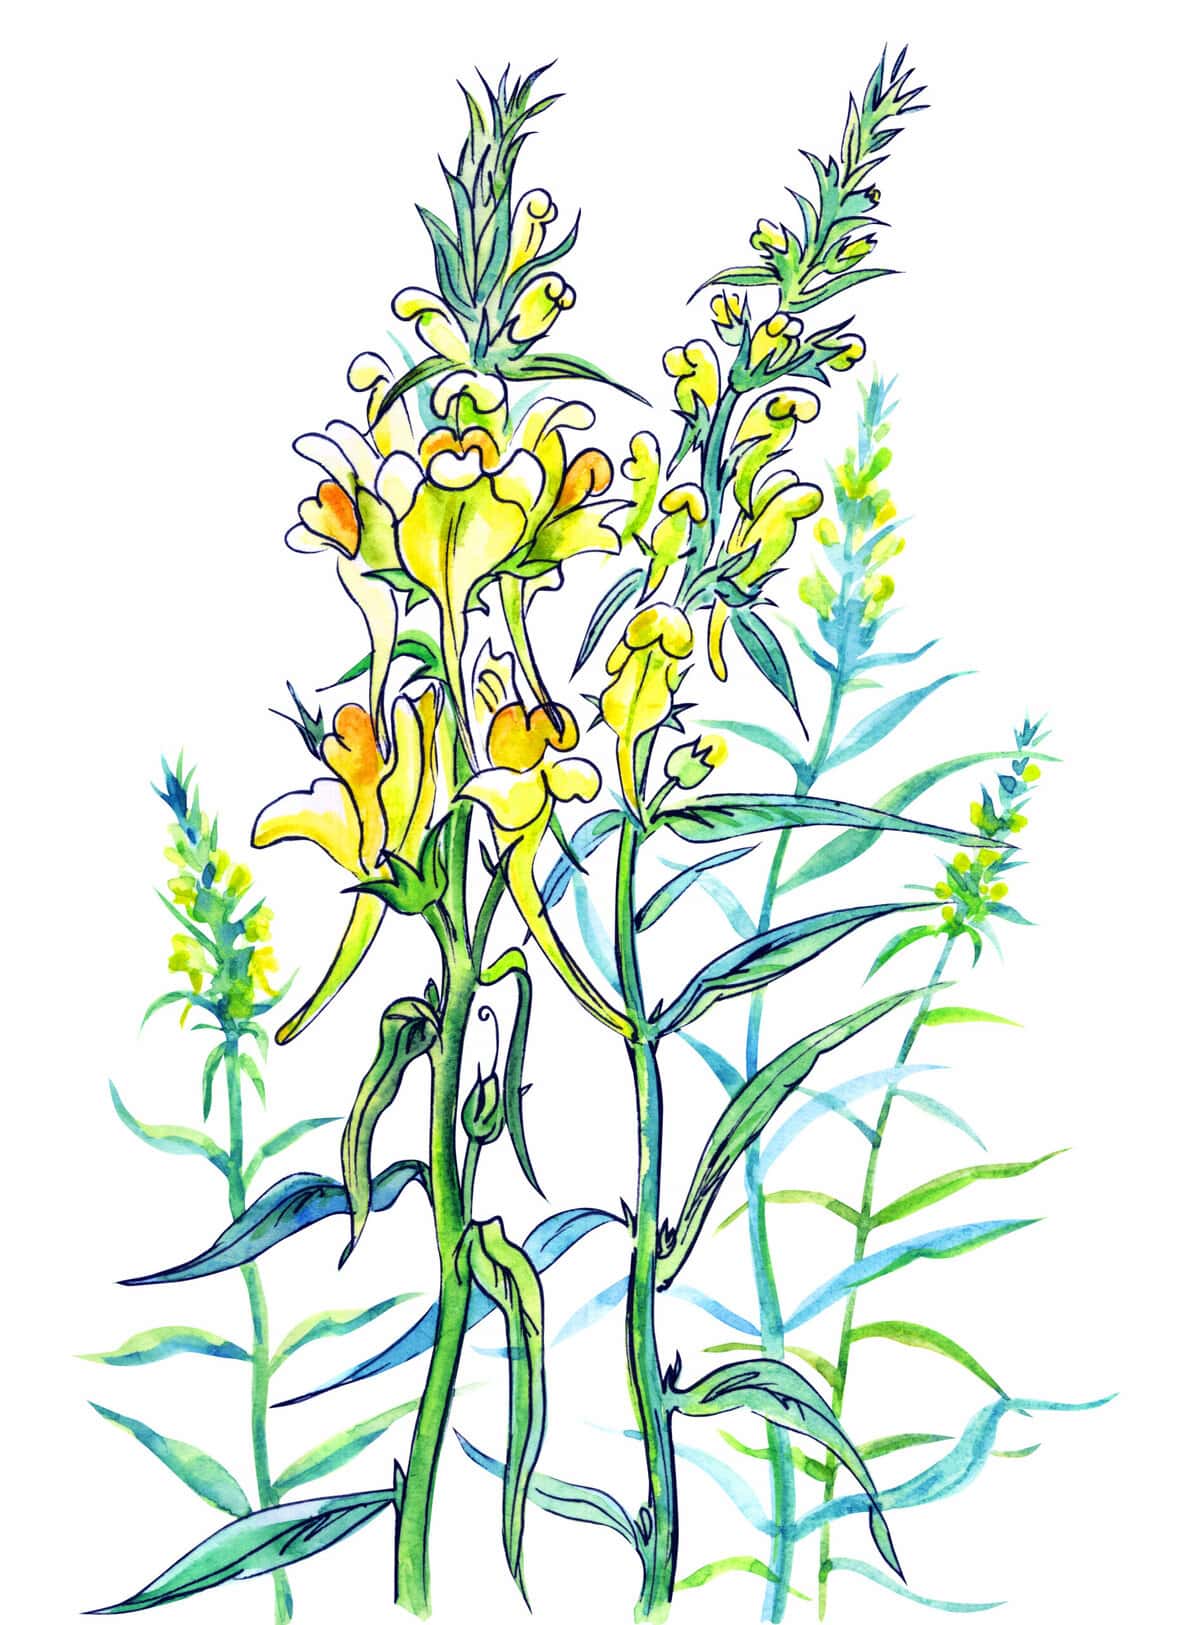 Watercolor illustration of yellow snapdragon flowers with green leaves on a white background.